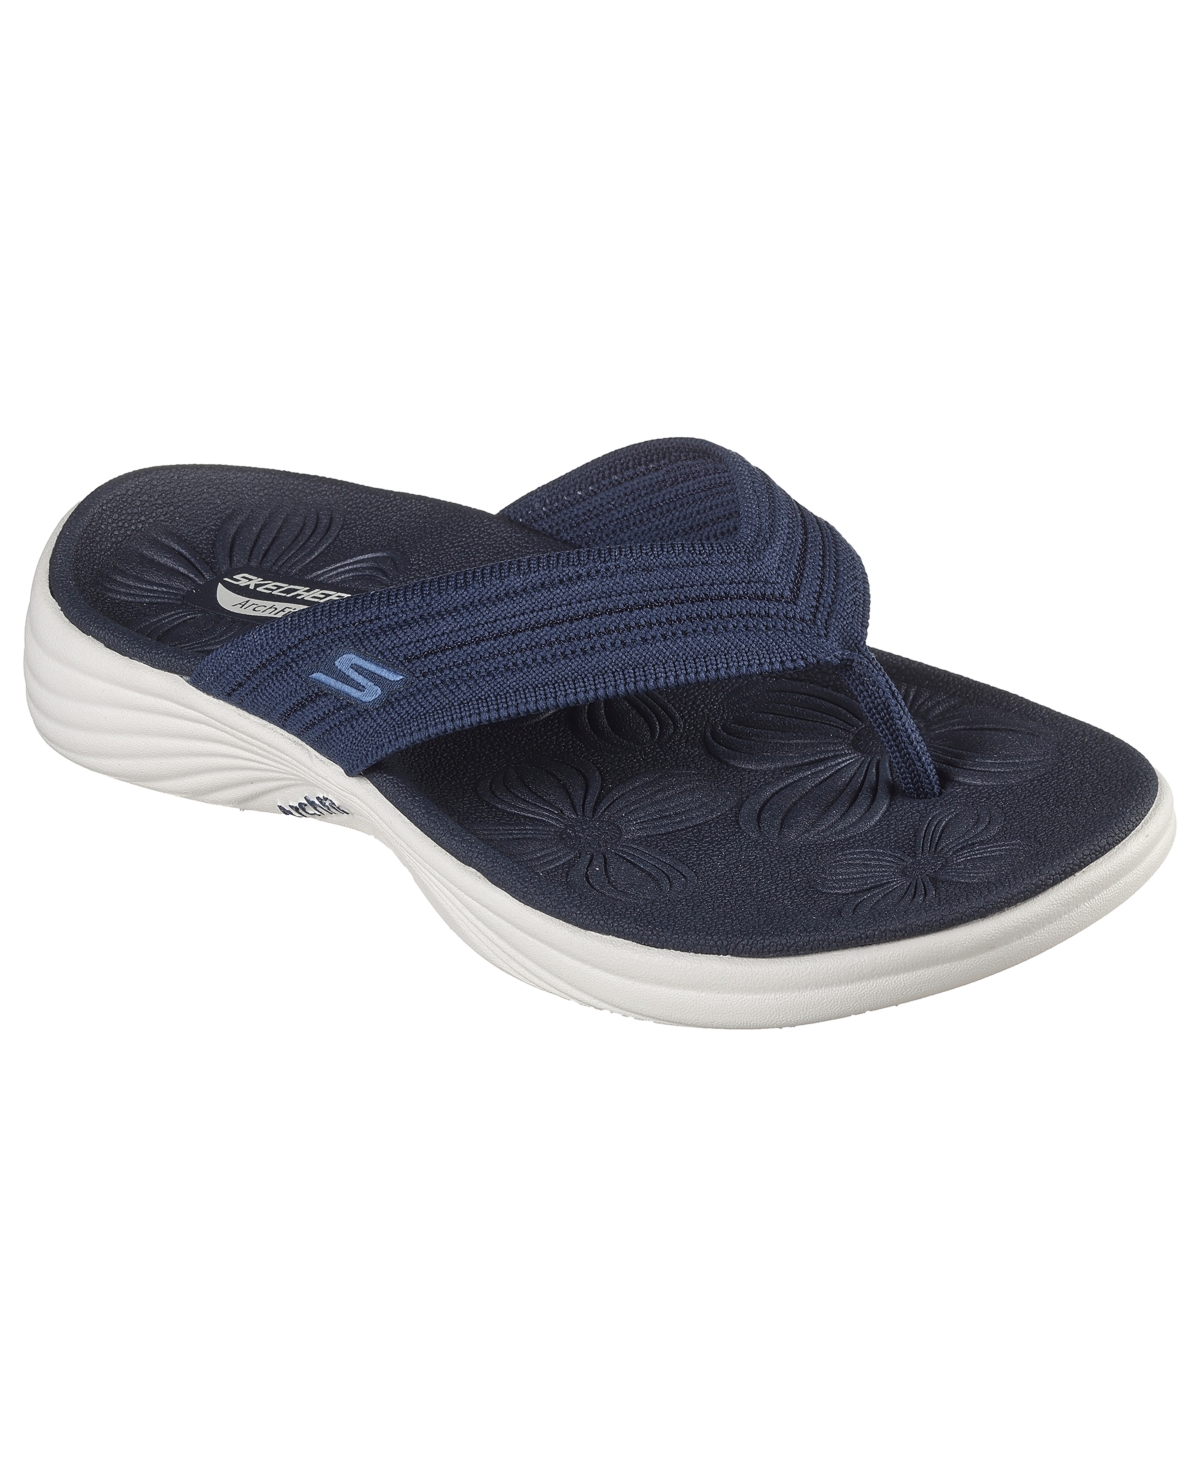 Women's Go Walk Arch Fit Radiance - Lure Thong Sandals from Finish Line - Navy